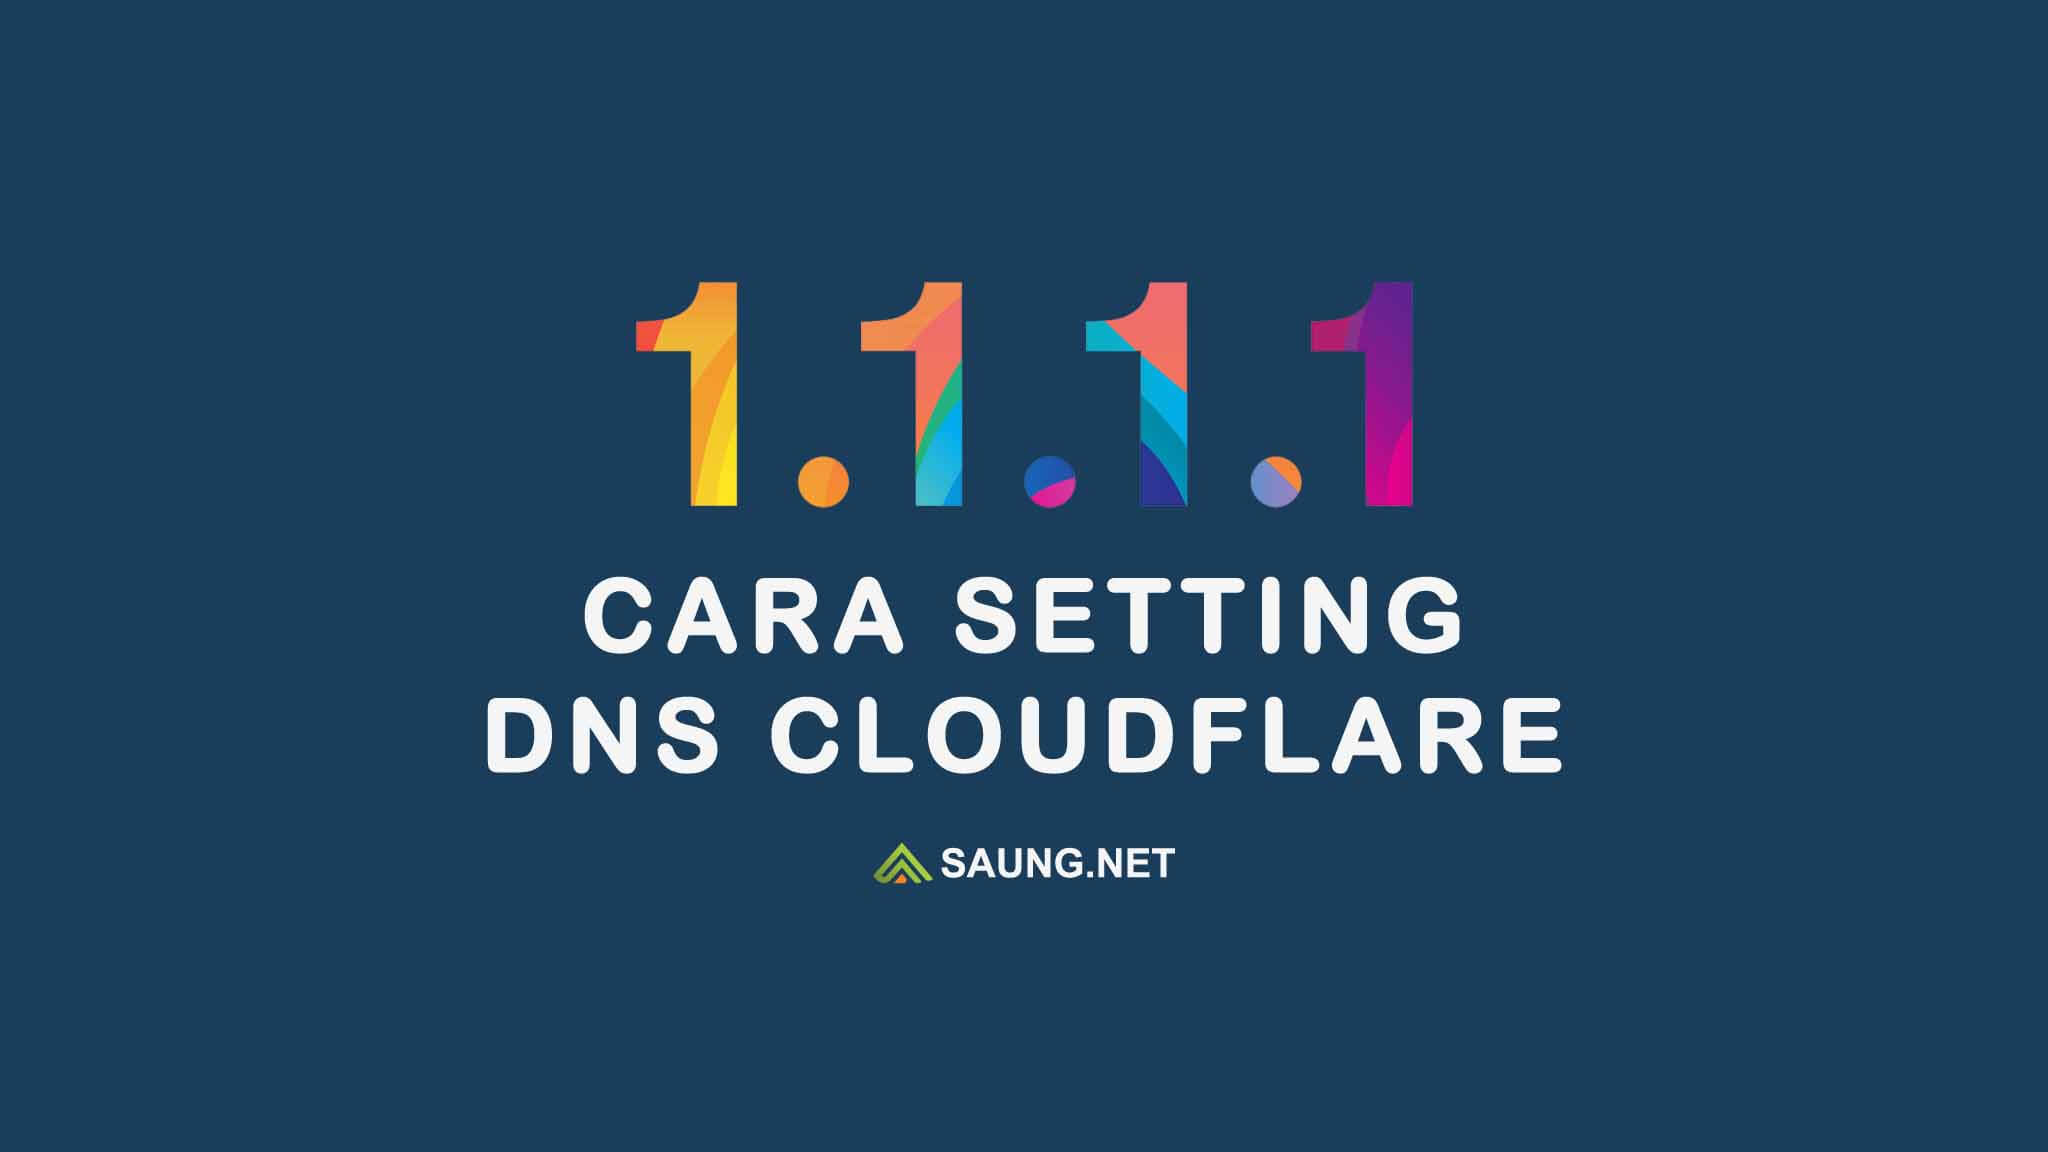 dns cloudflare